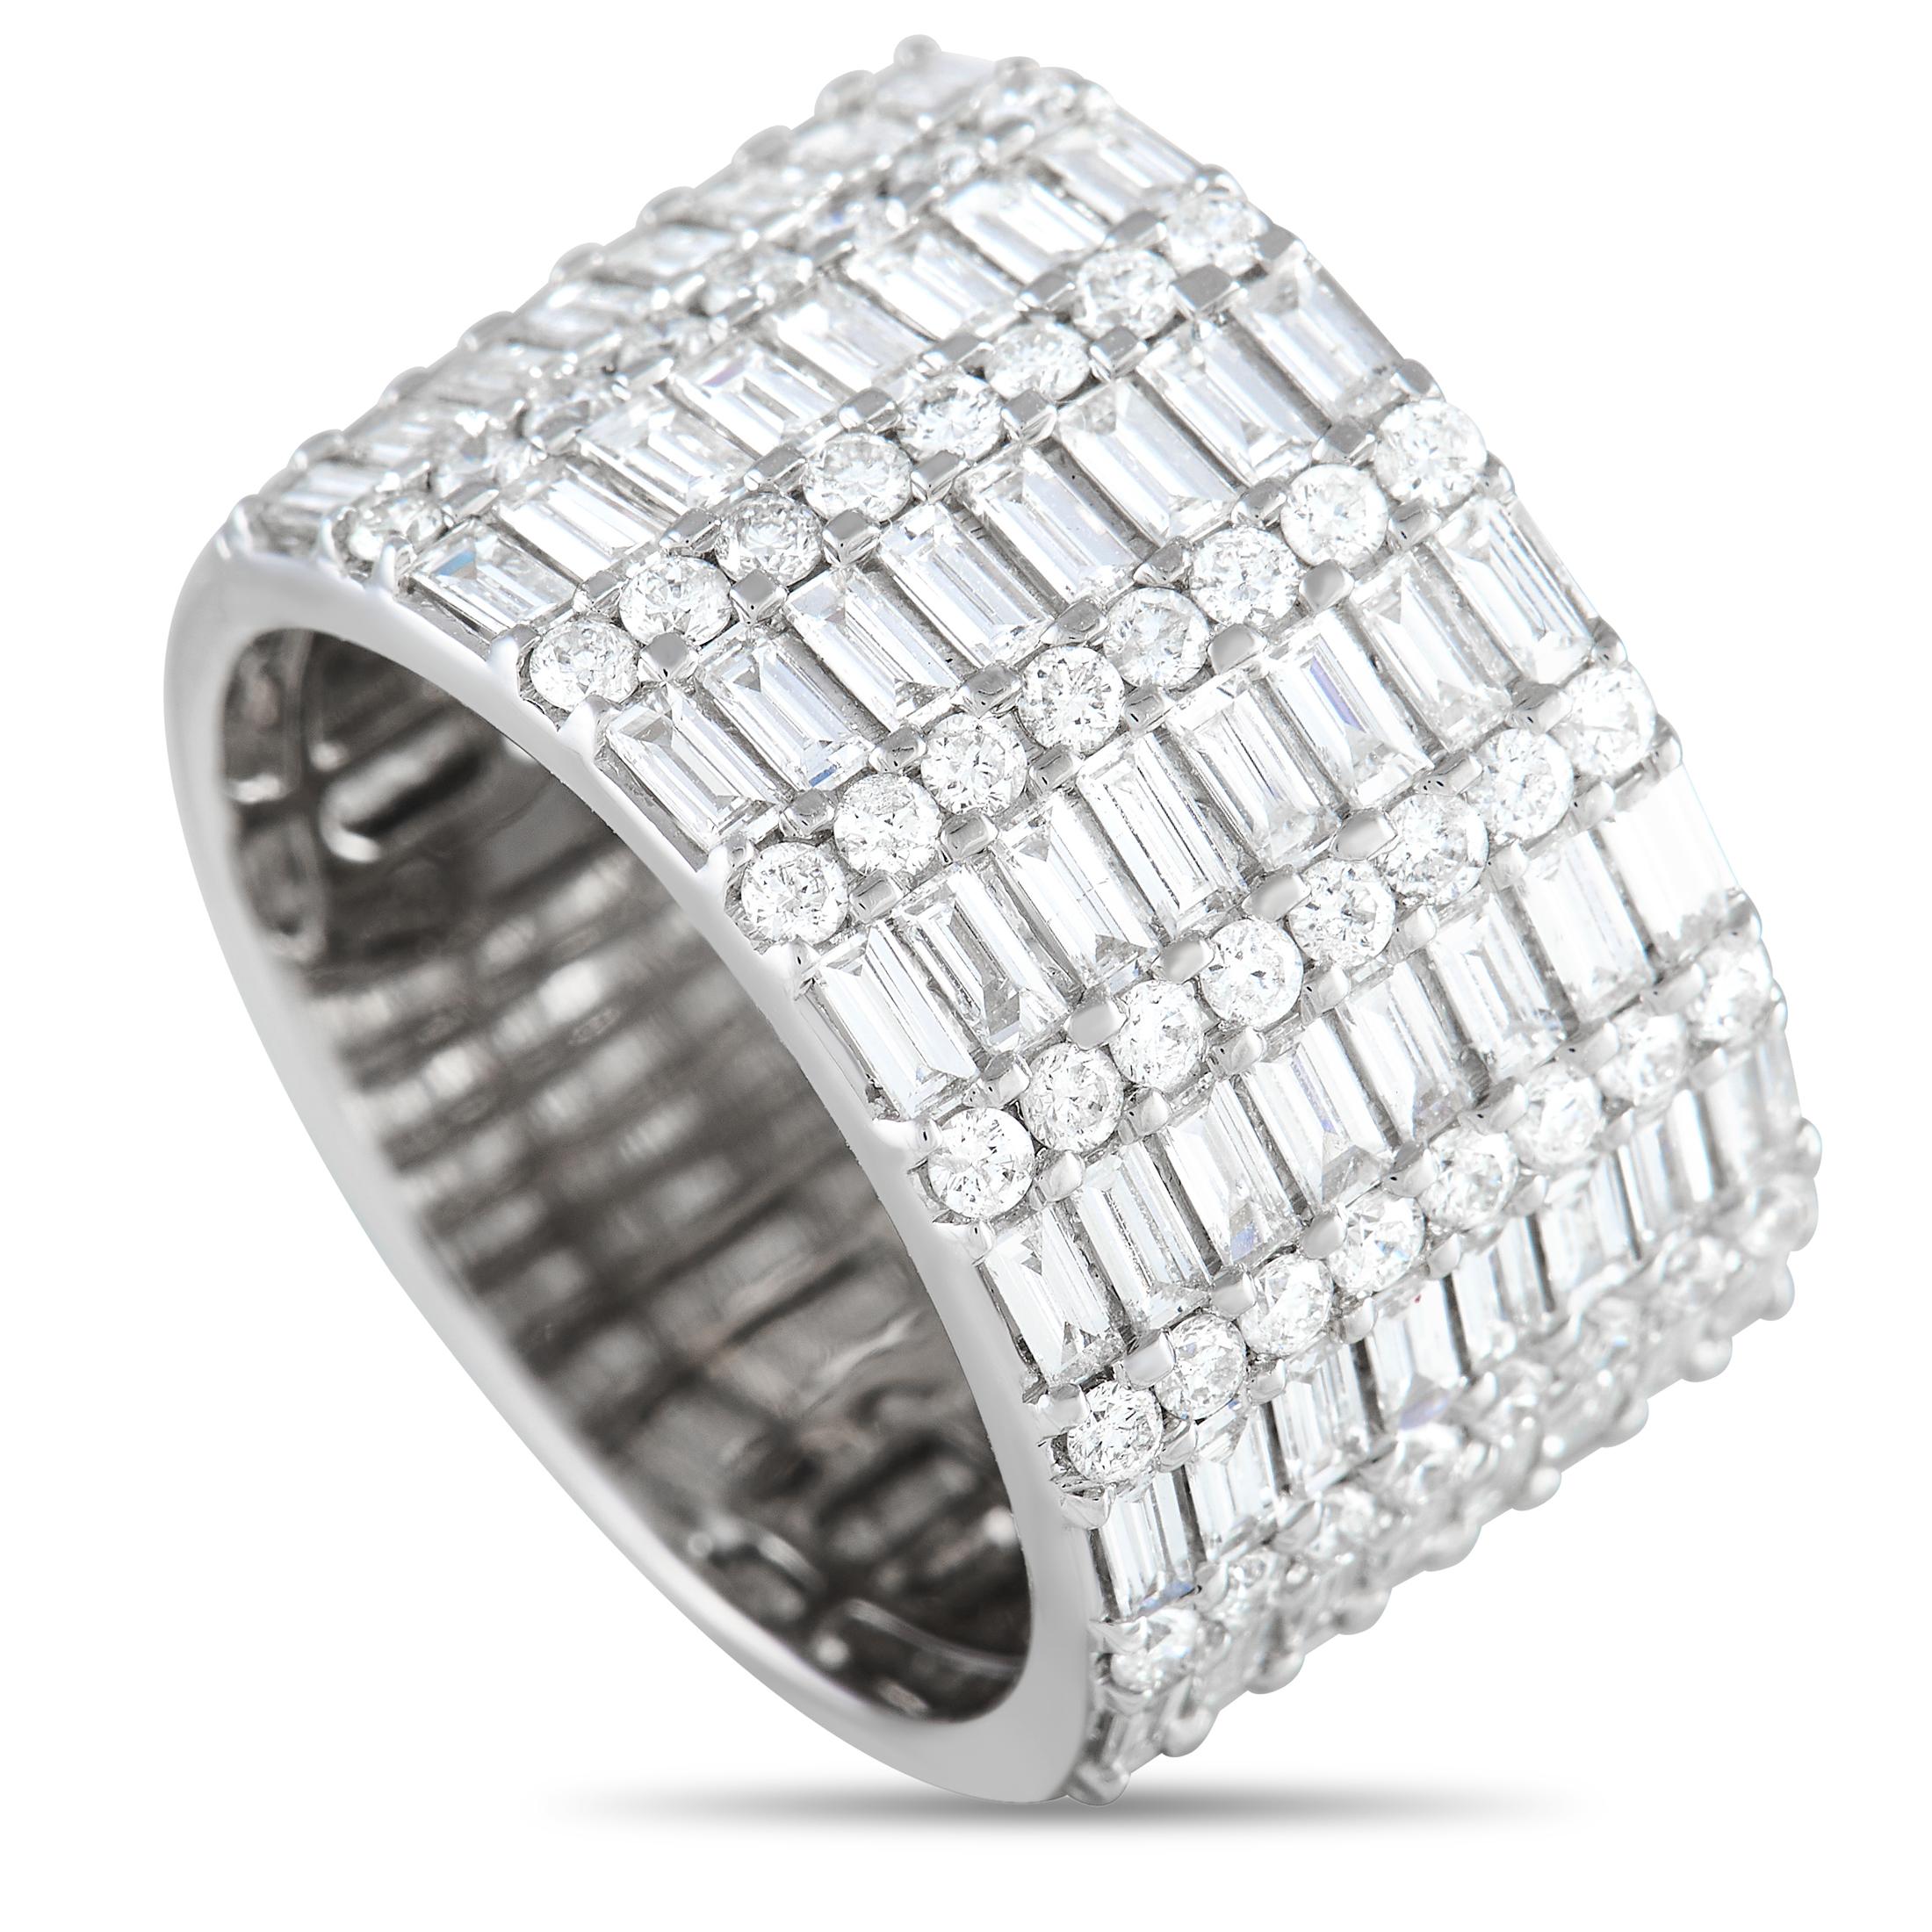 Elegant and edgy, this wide-band ring will deliver a bold and brilliant boost of style to your looks. The band measures 13mm wide and features eight rows of diamonds, alternating between round and baguette-cut diamonds. Top dimensions measure 20mm x